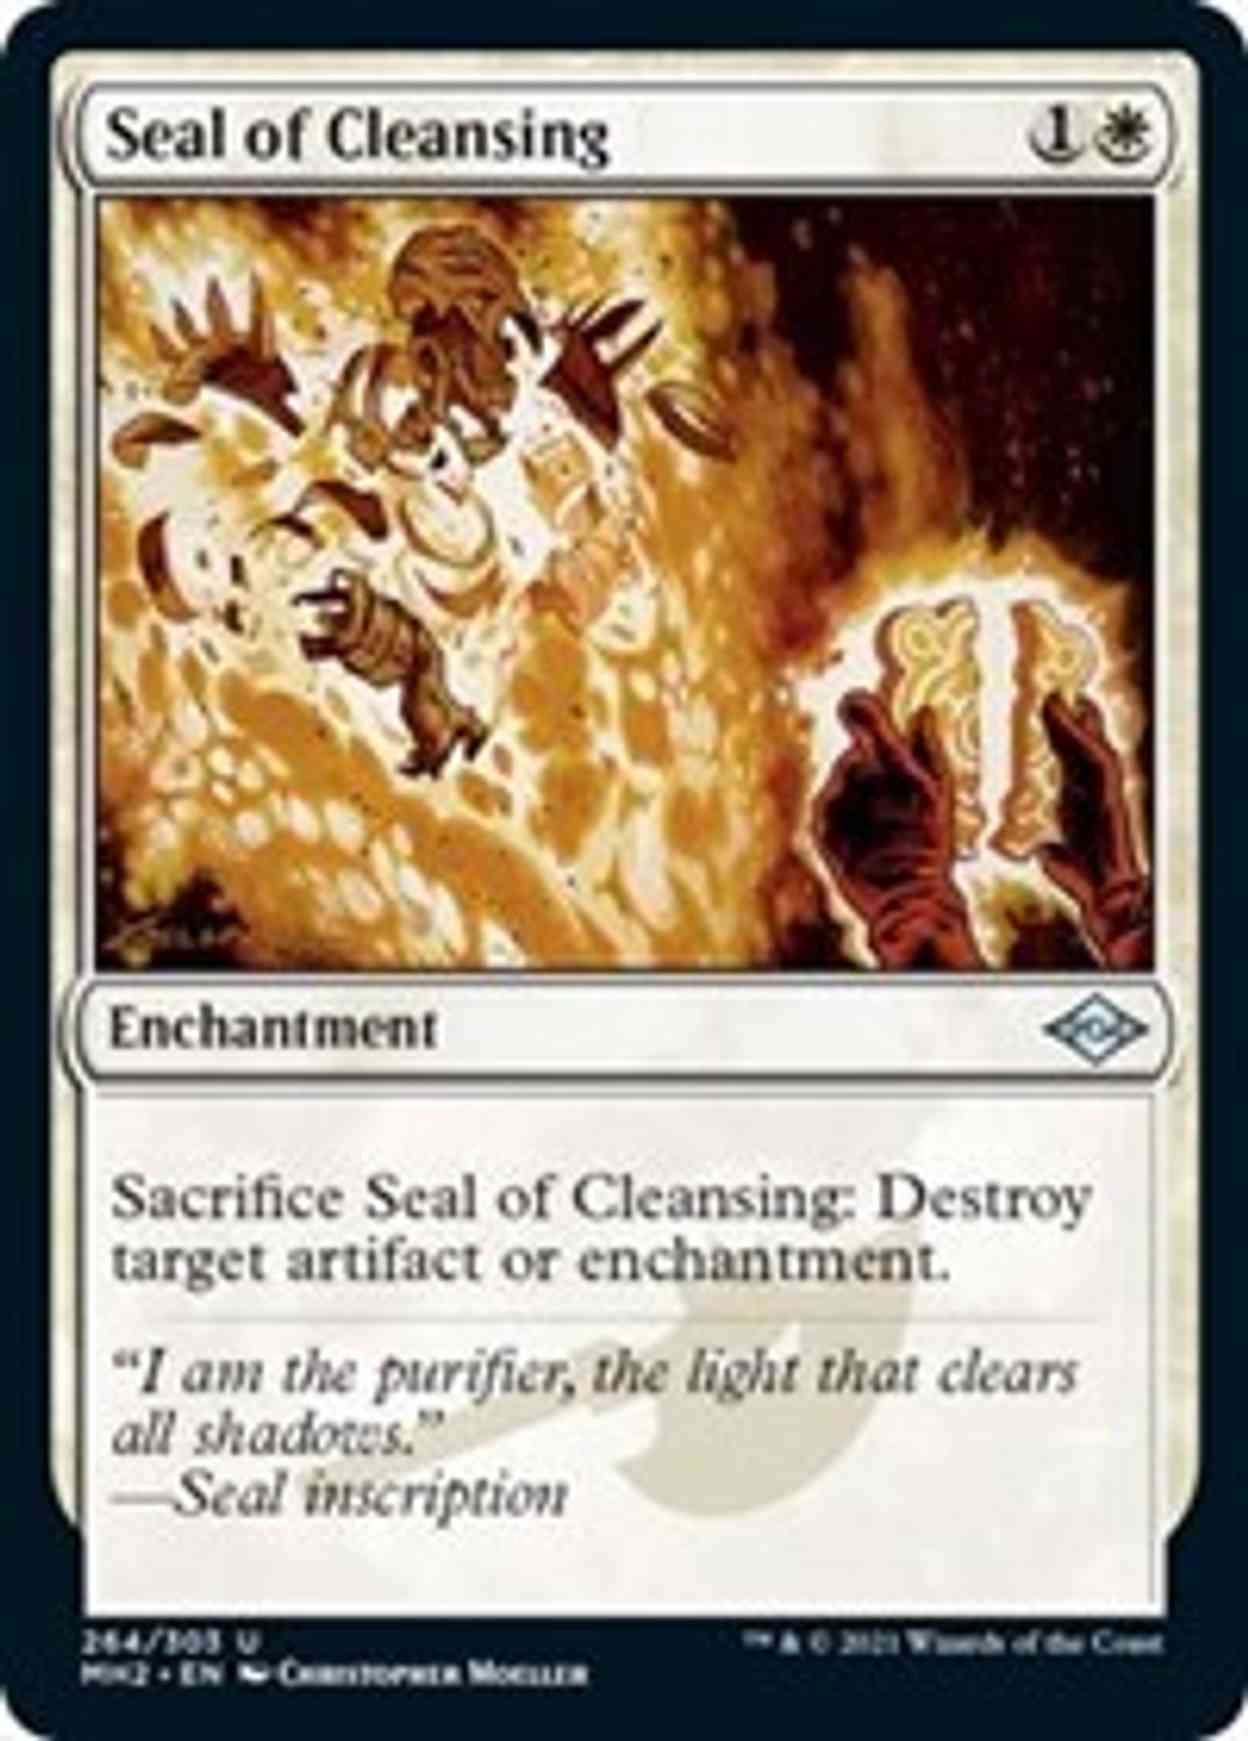 Seal of Cleansing (Foil Etched) magic card front